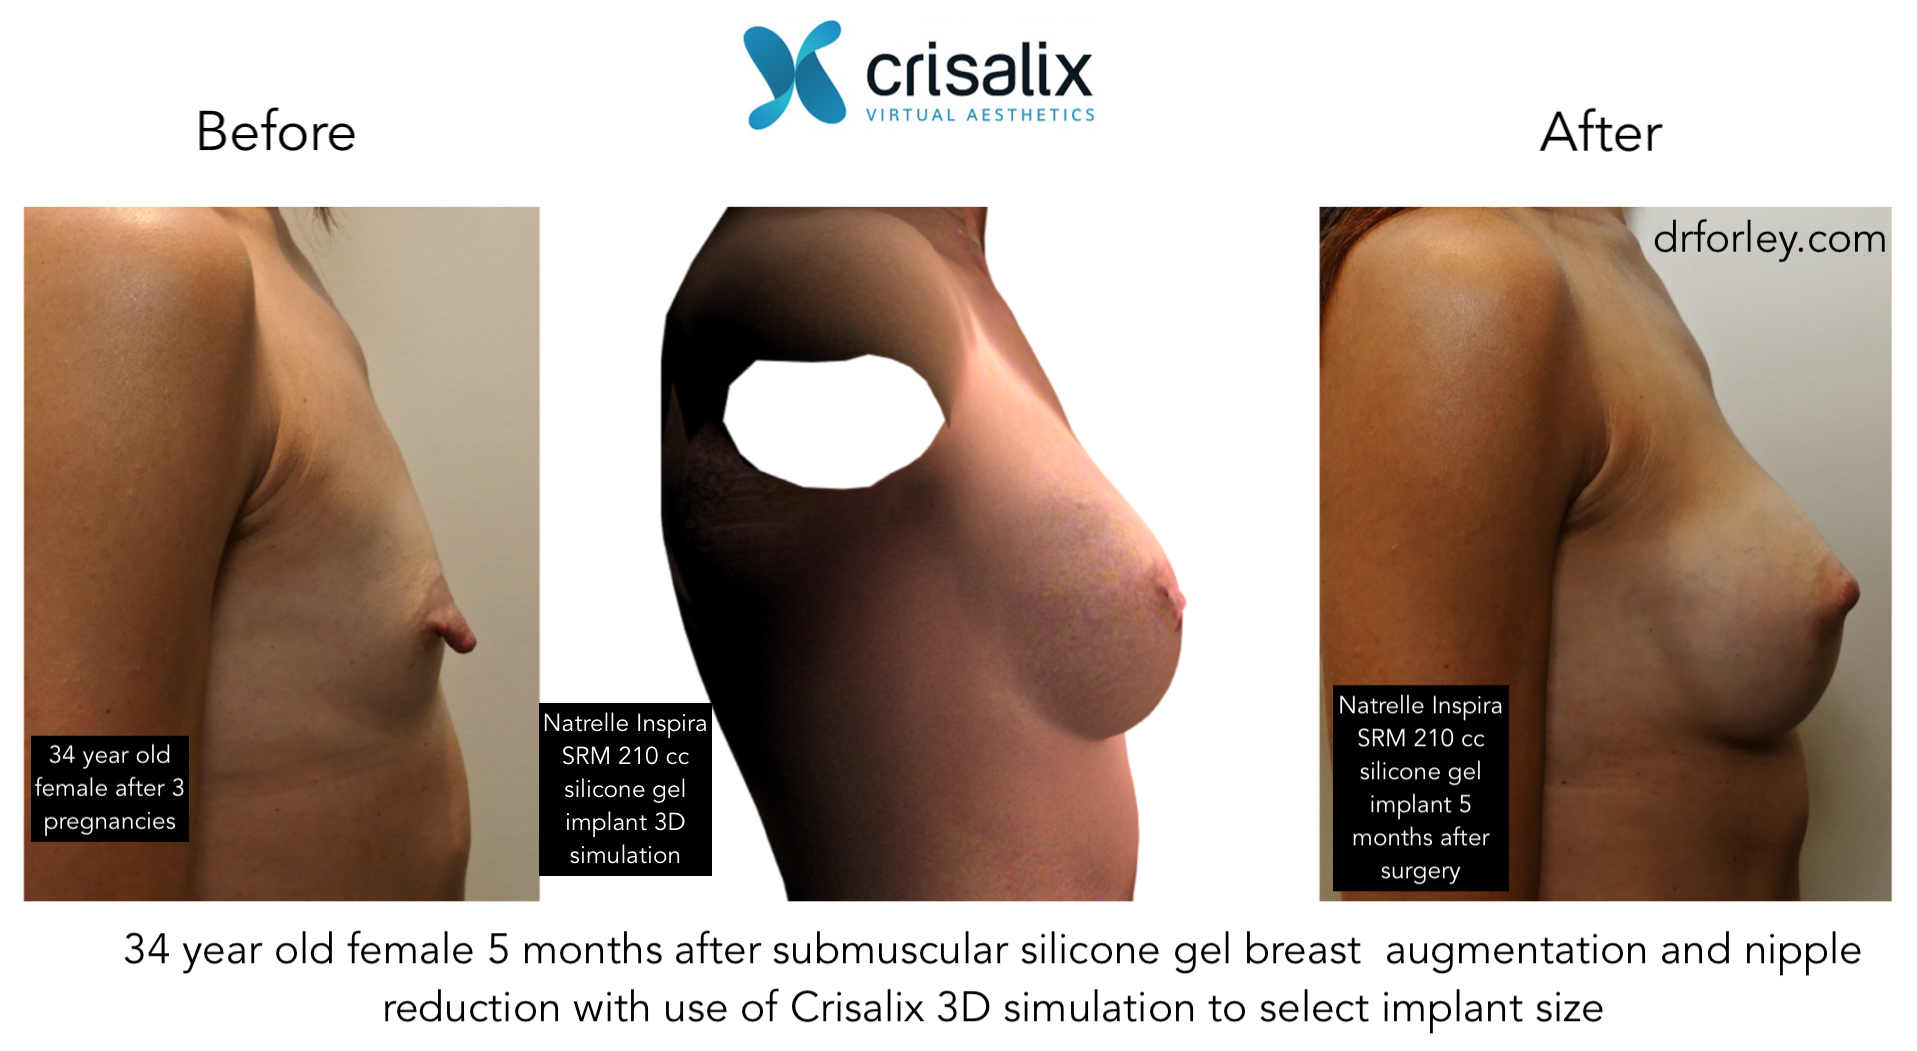 34 year old female 5 months after submuscular silicone gel breast augmentation and nipple reduction with use of Crisalix simulation to select implant size